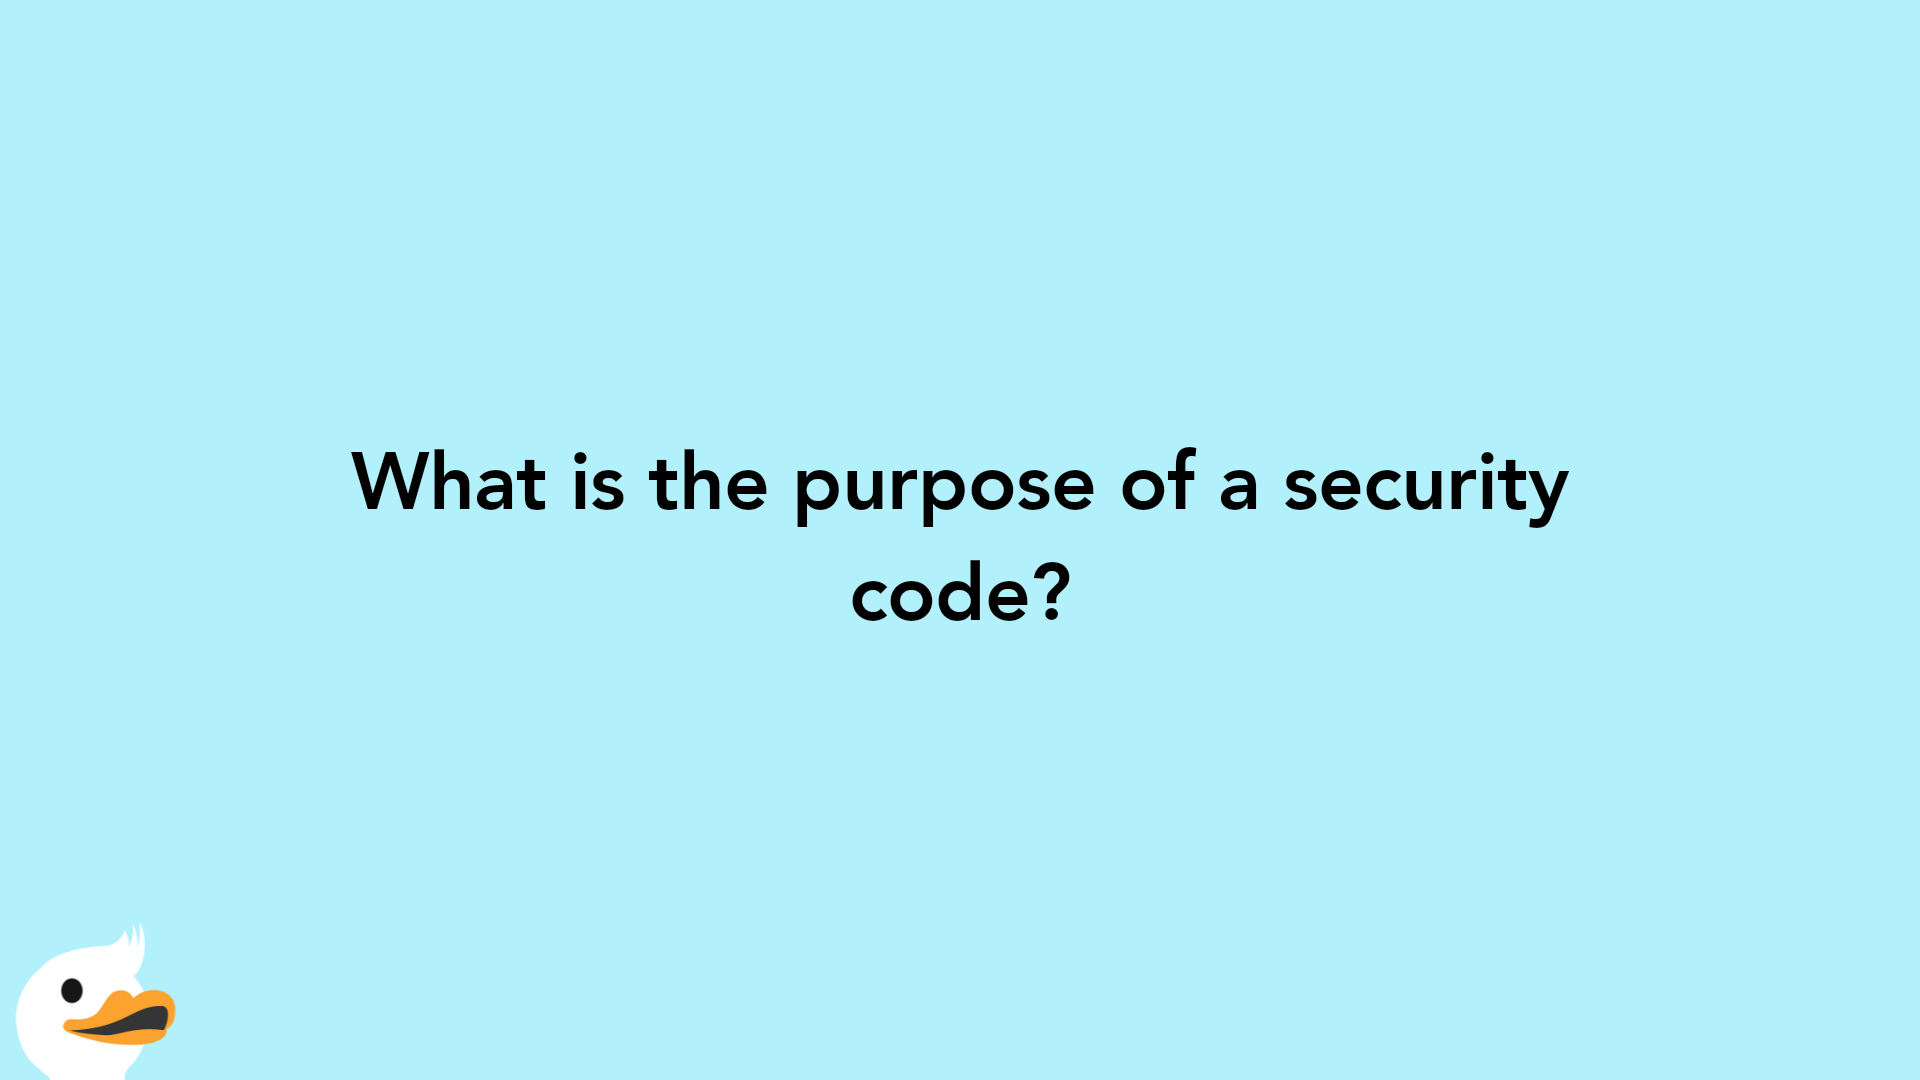 What is the purpose of a security code?